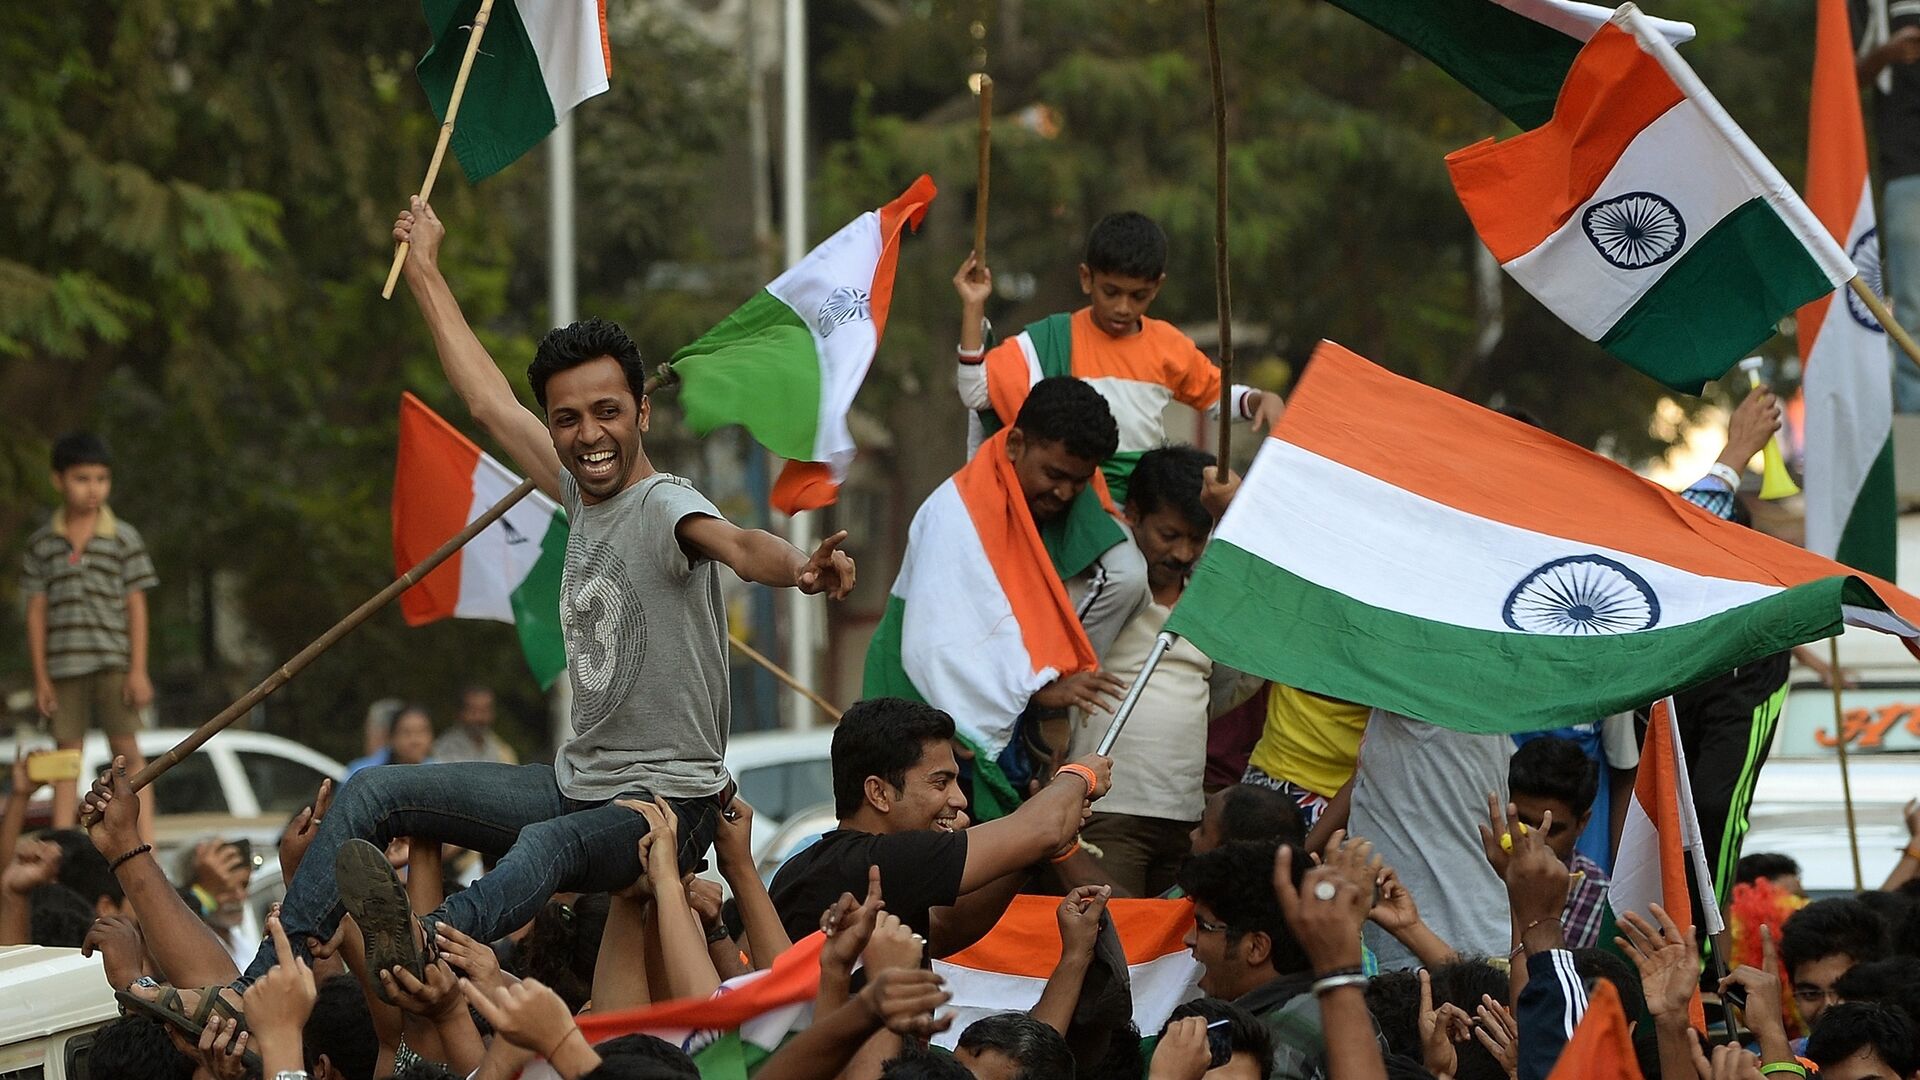 Indian fans wave national flags as they celebrate after India won the 2015 Cricket World Cup's cricket match against Pakistan, on the streets of Mumbai - اسپوتنیک افغانستان  , 1920, 18.08.2022